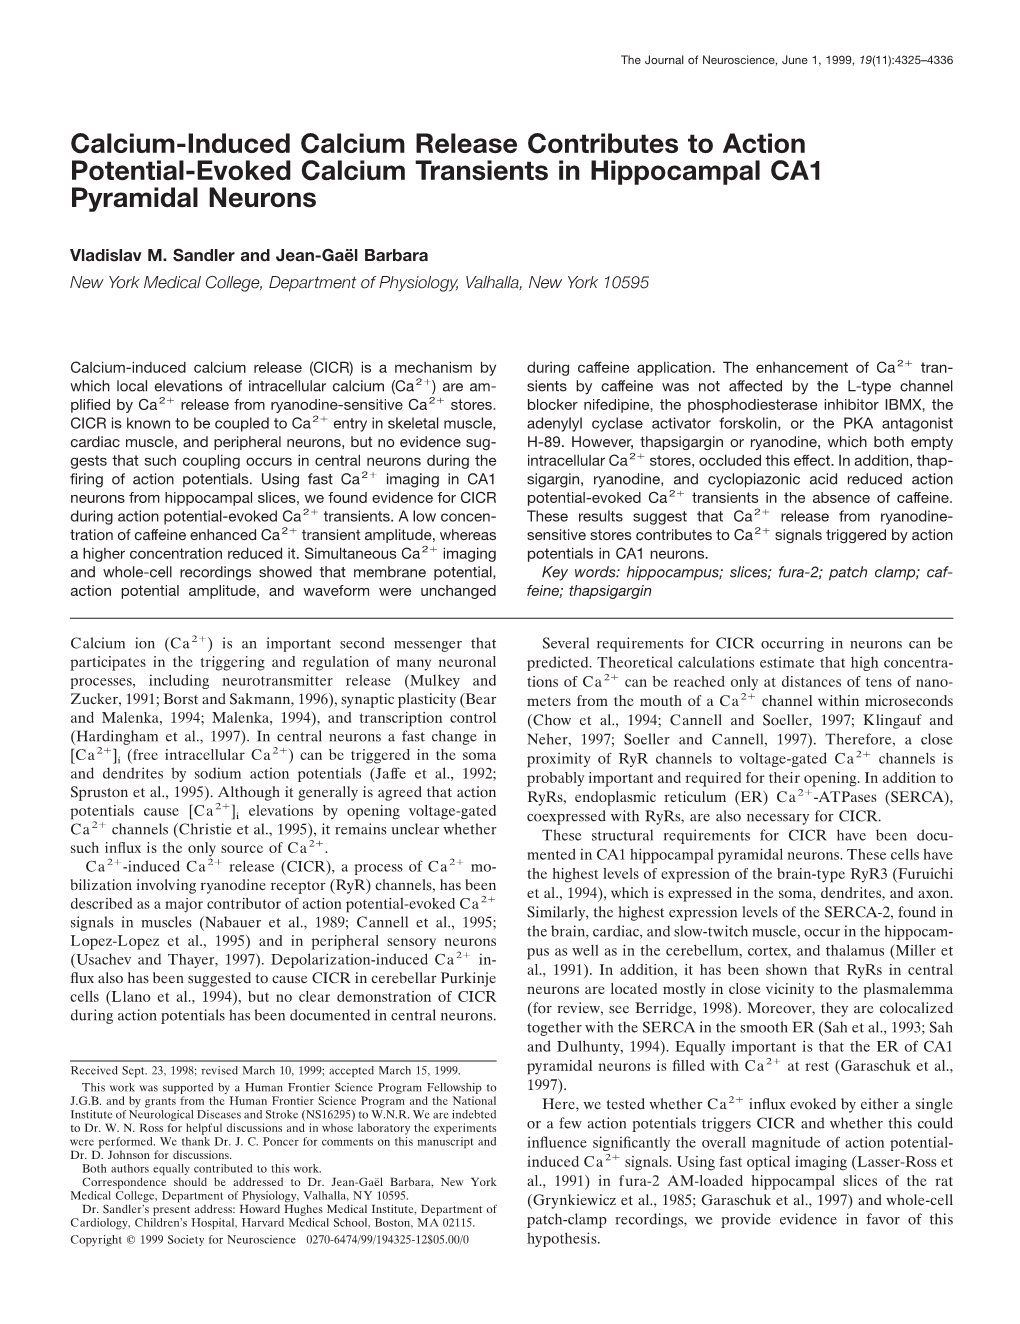 Calcium-Induced Calcium Release Contributes to Action Potential-Evoked Calcium Transients in Hippocampal CA1 Pyramidal Neurons